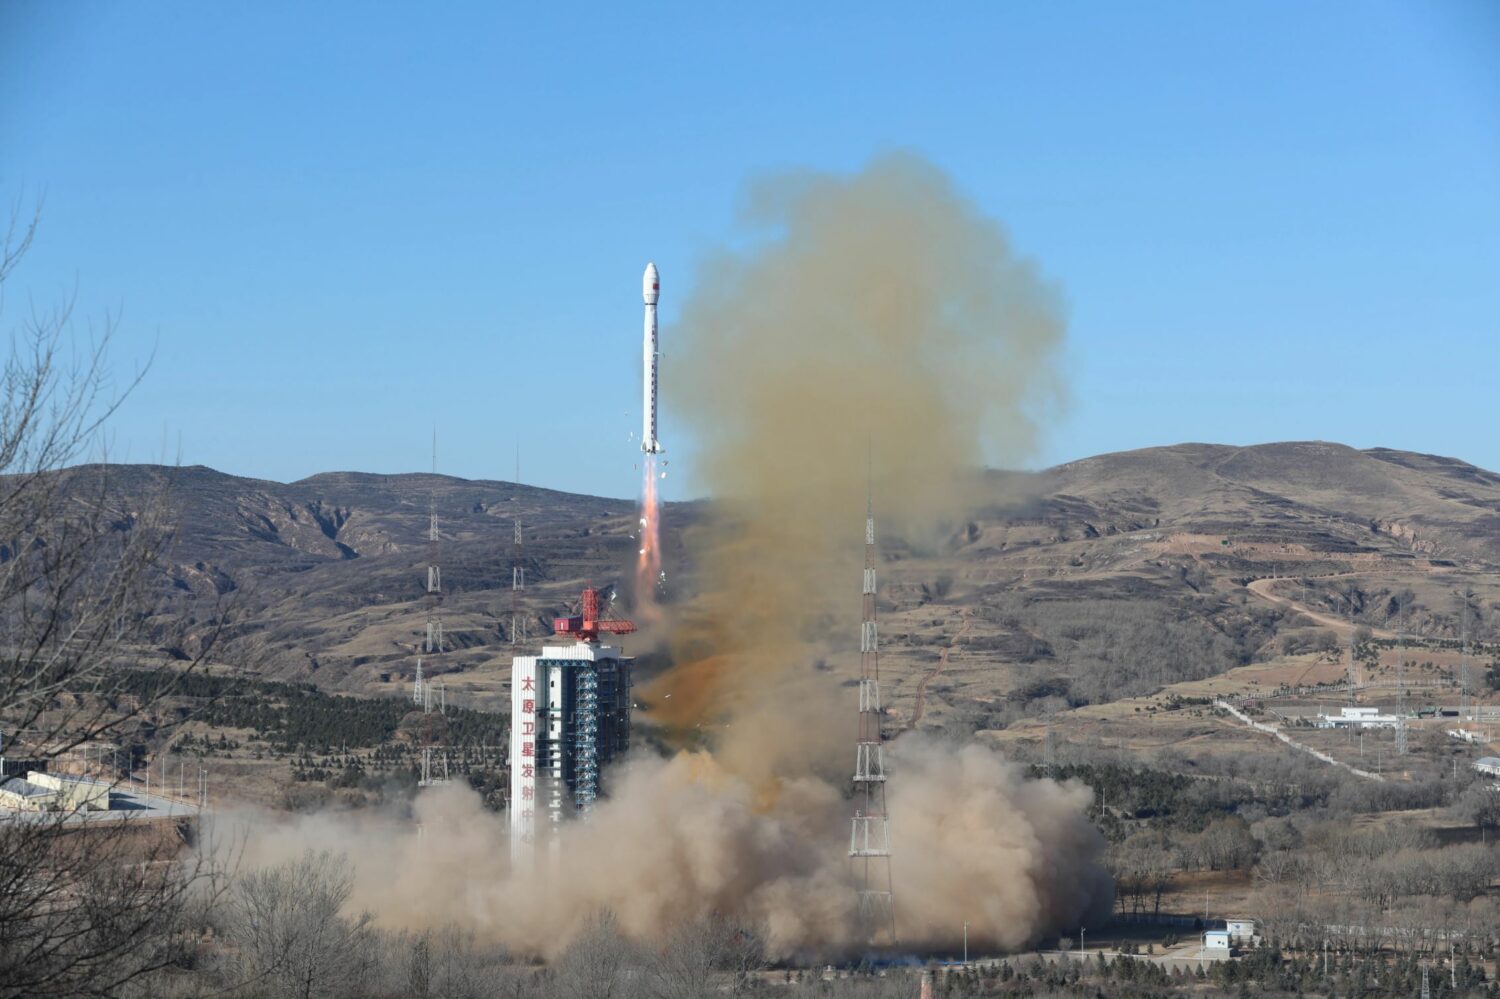 China launches mineral survey and science outreach satellites